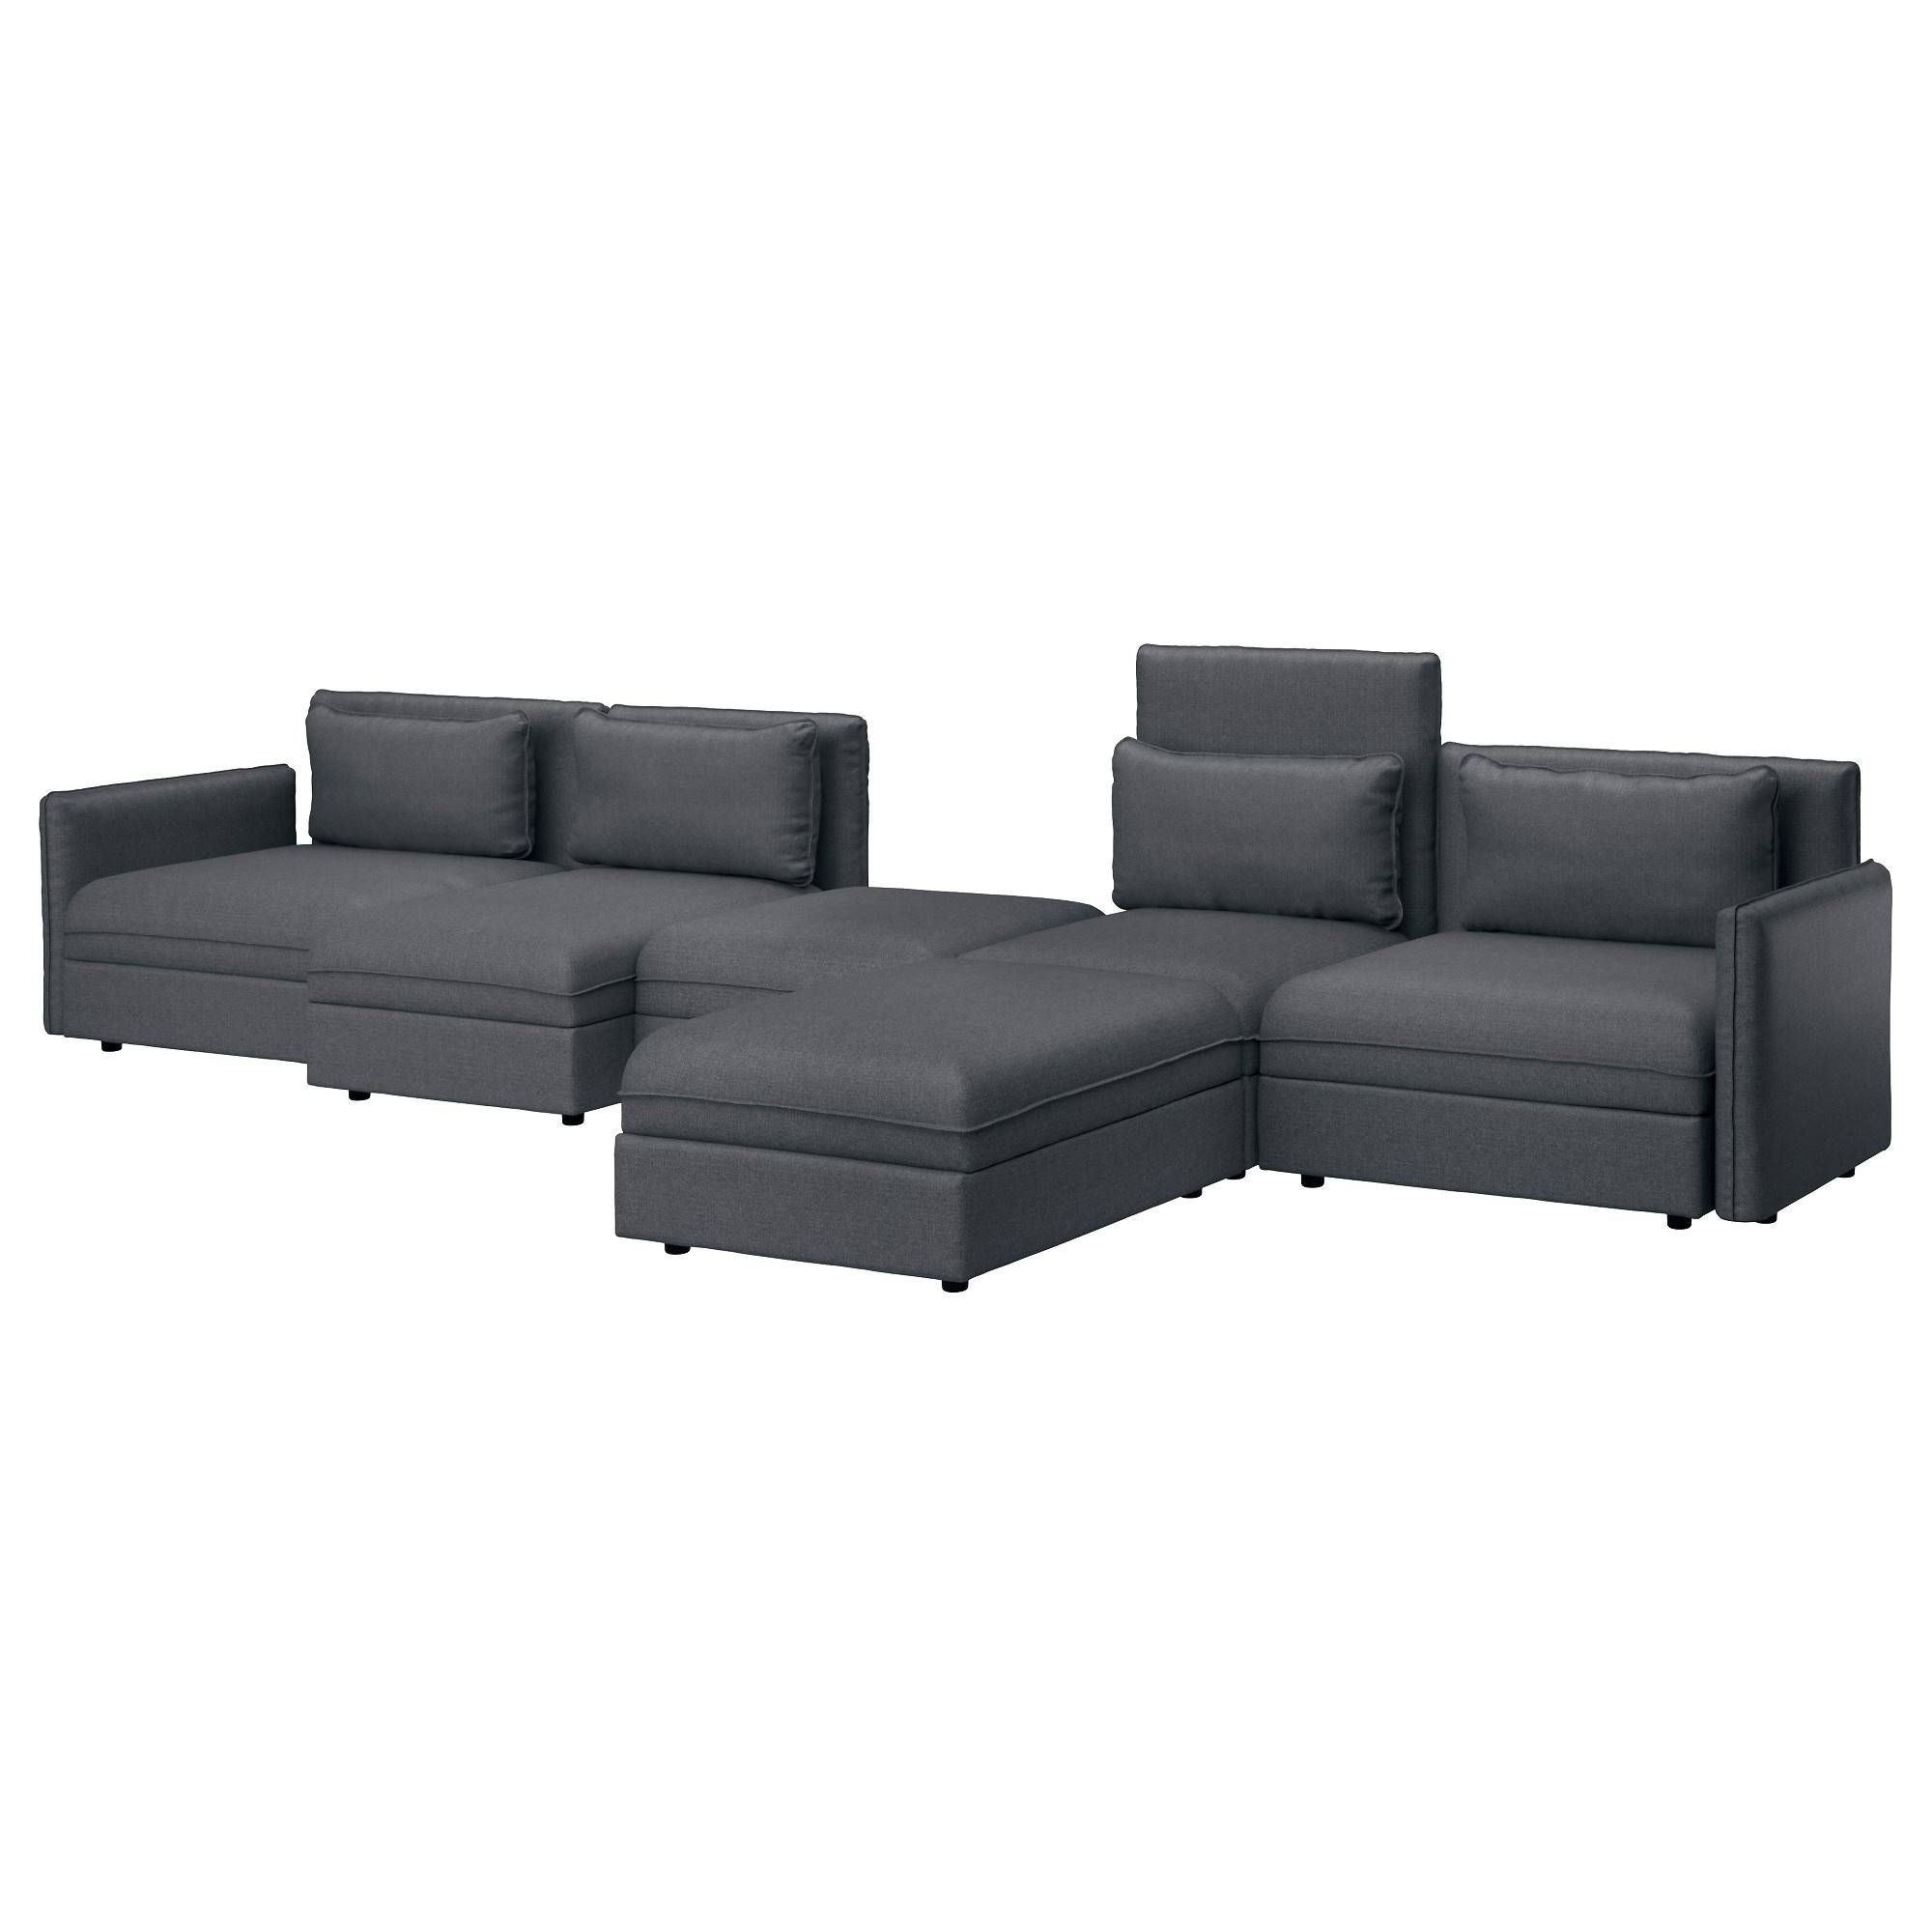 Sectional Sofas & Couches – Ikea Within Media Room Sectional Sofas (View 22 of 25)